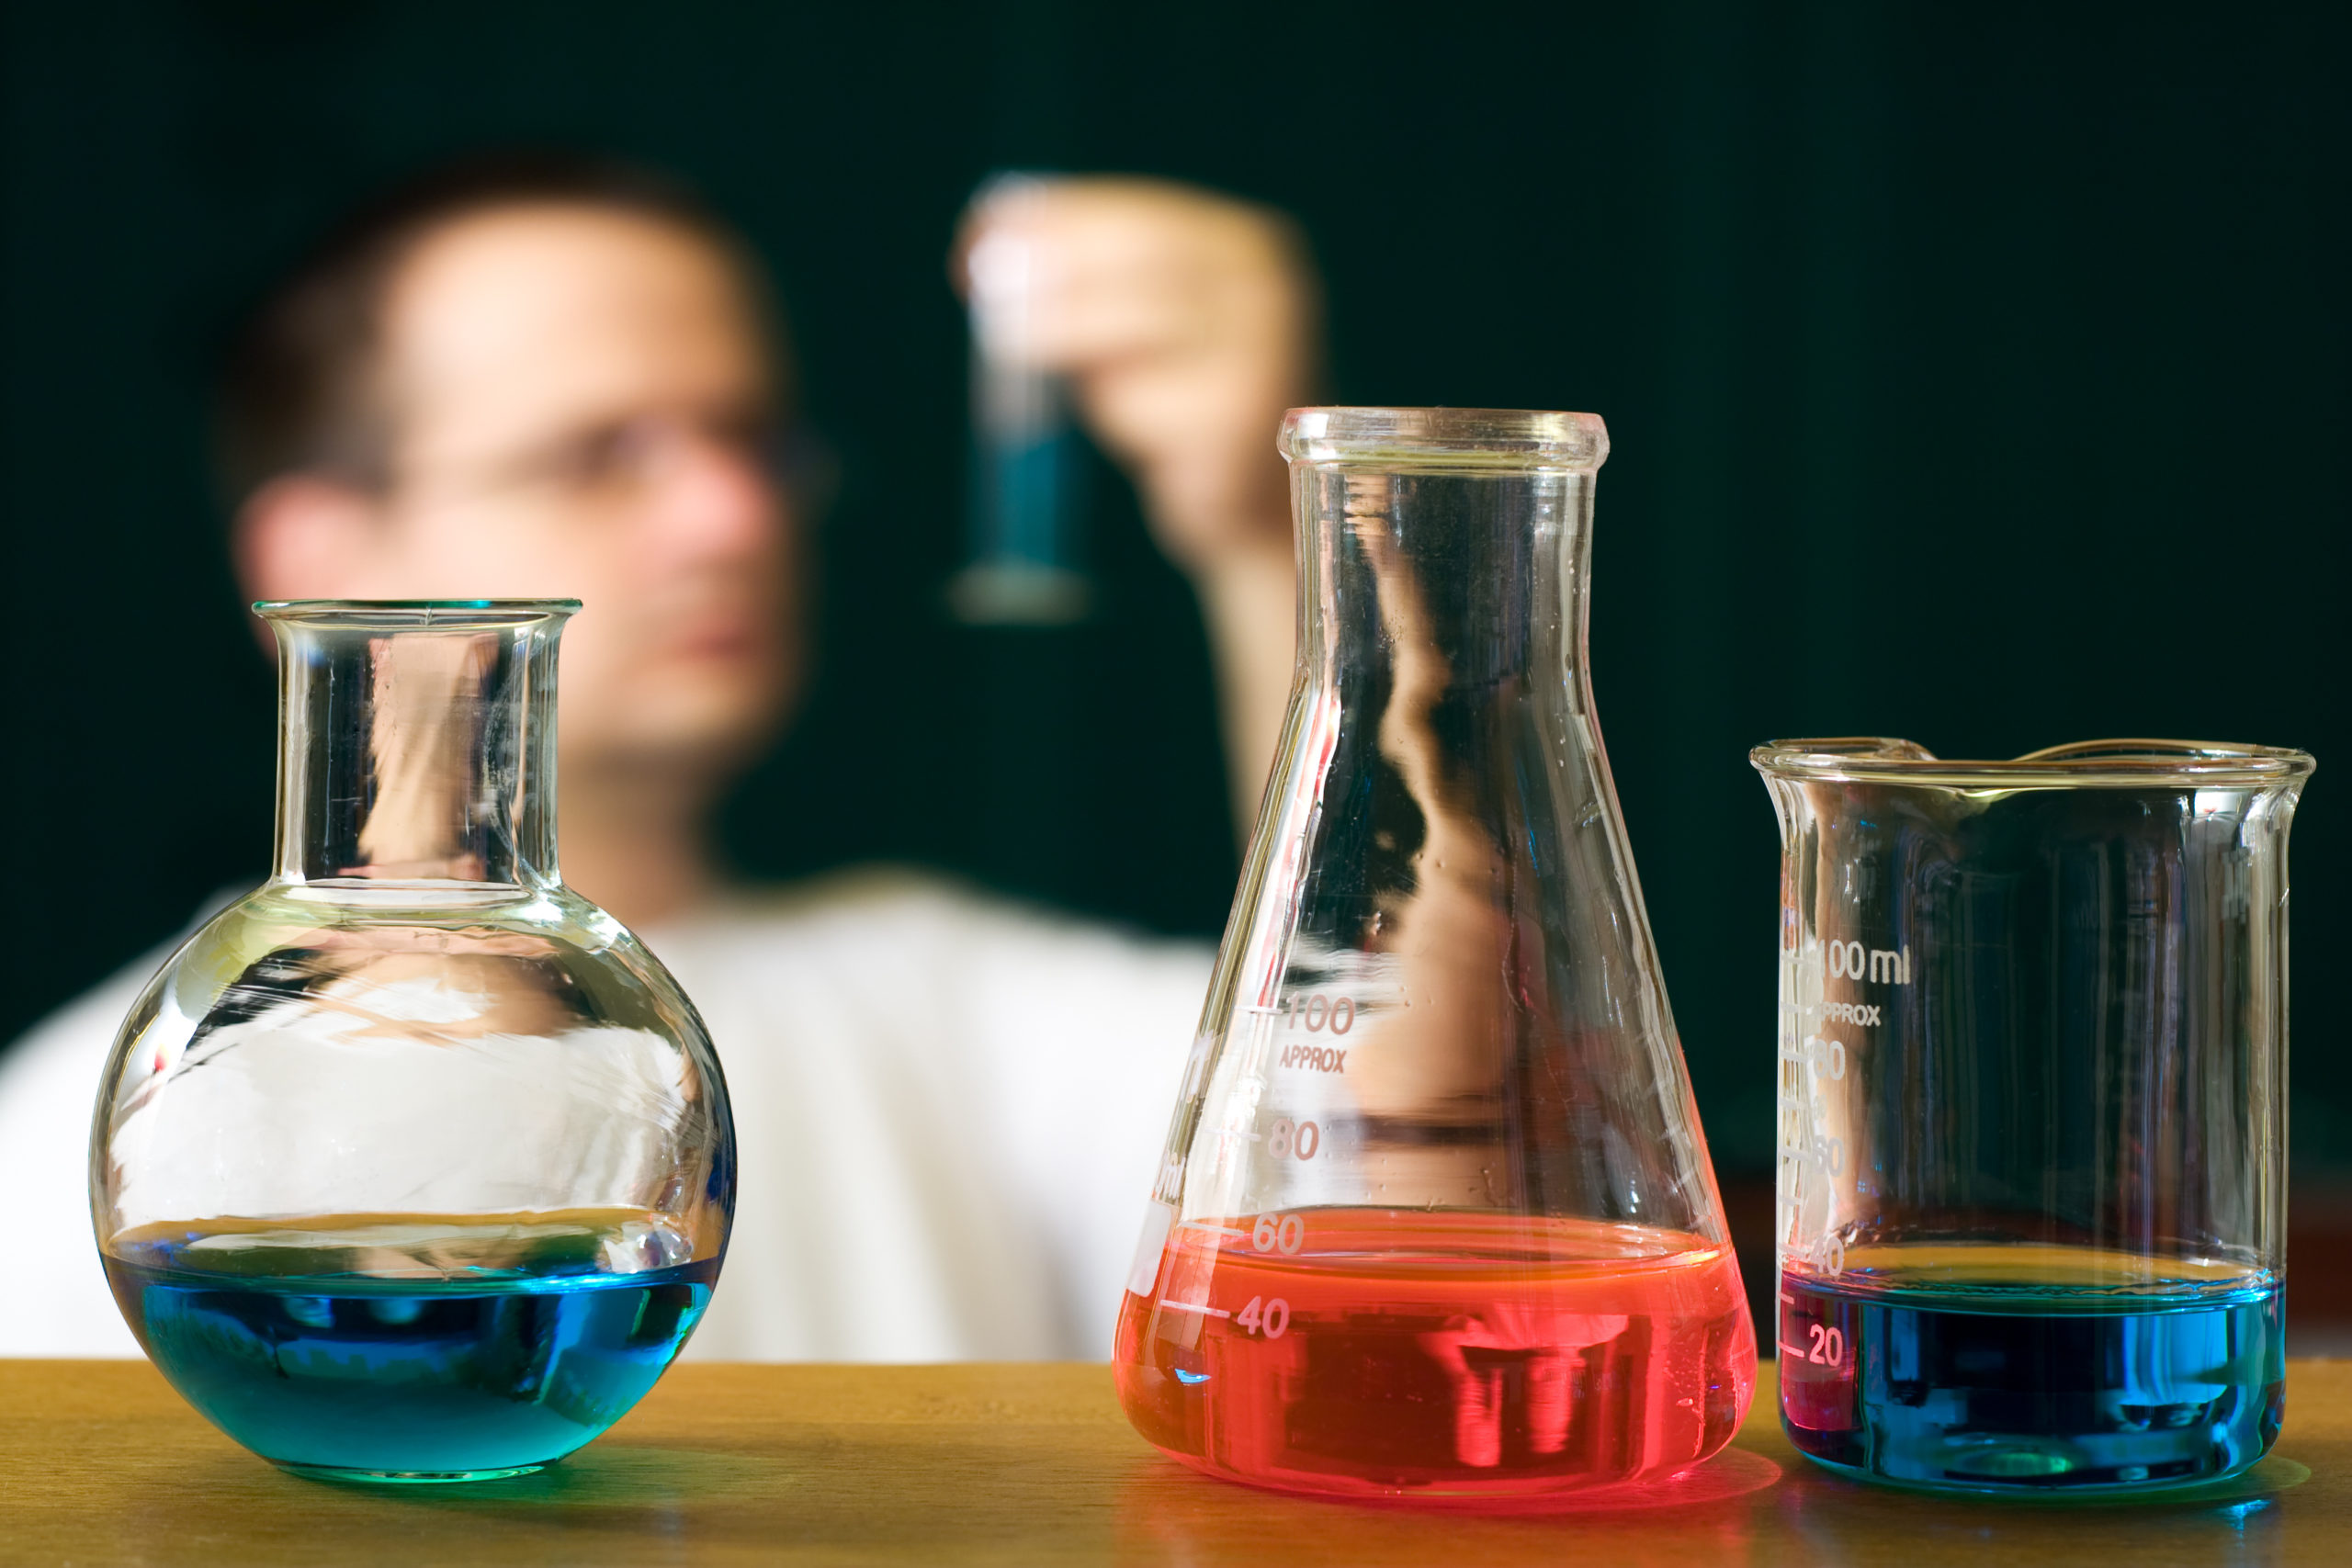 Chemistry research concept with flasks and a blurred scientist